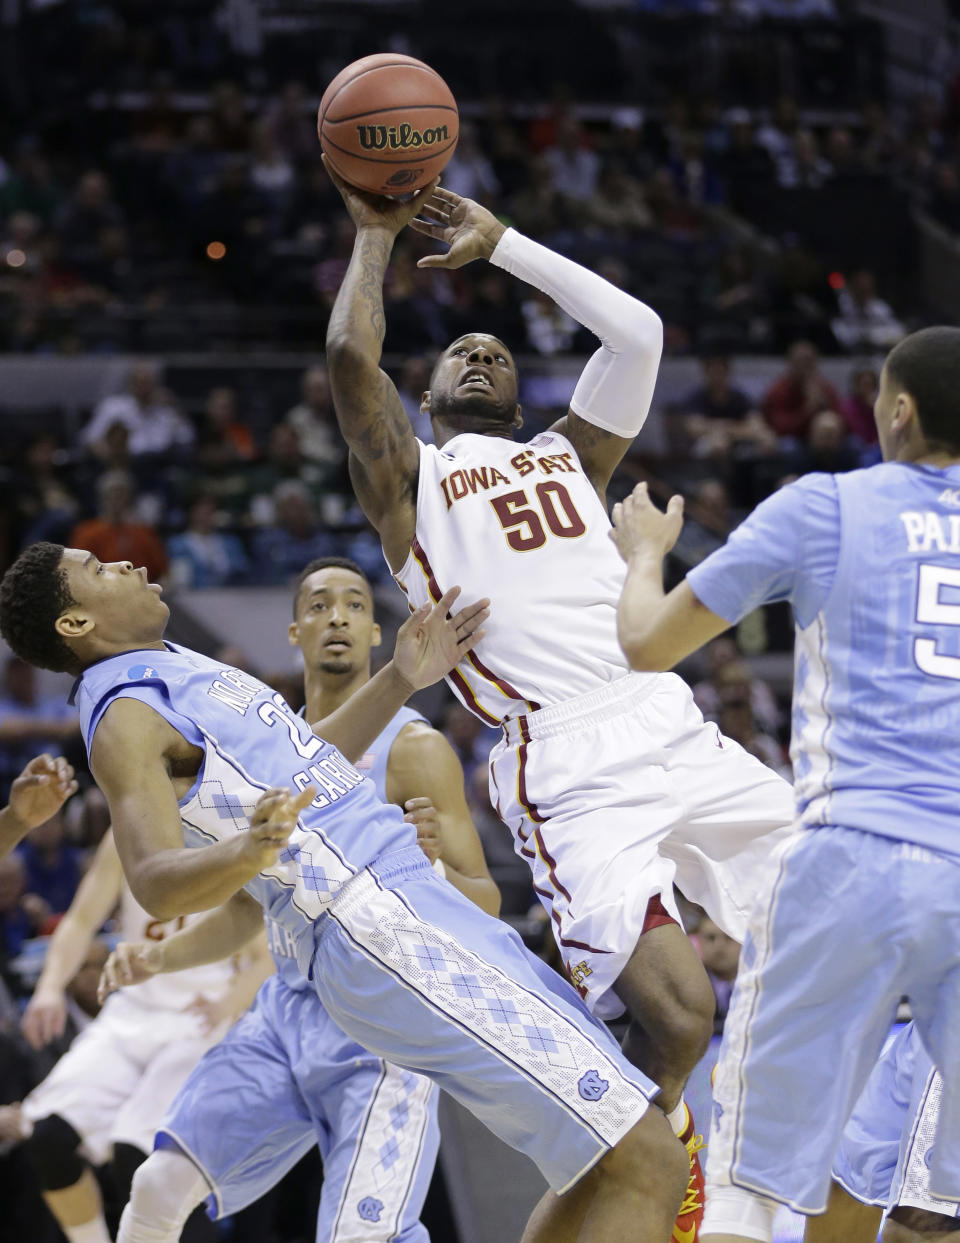 Iowa State's DeAndre Kane (50) shoots over North Carolina's Isaiah Hicks (22) during the first half of a third-round game in the NCAA college basketball tournament Sunday, March 23, 2014, in San Antonio. (AP Photo/Eric Gay)